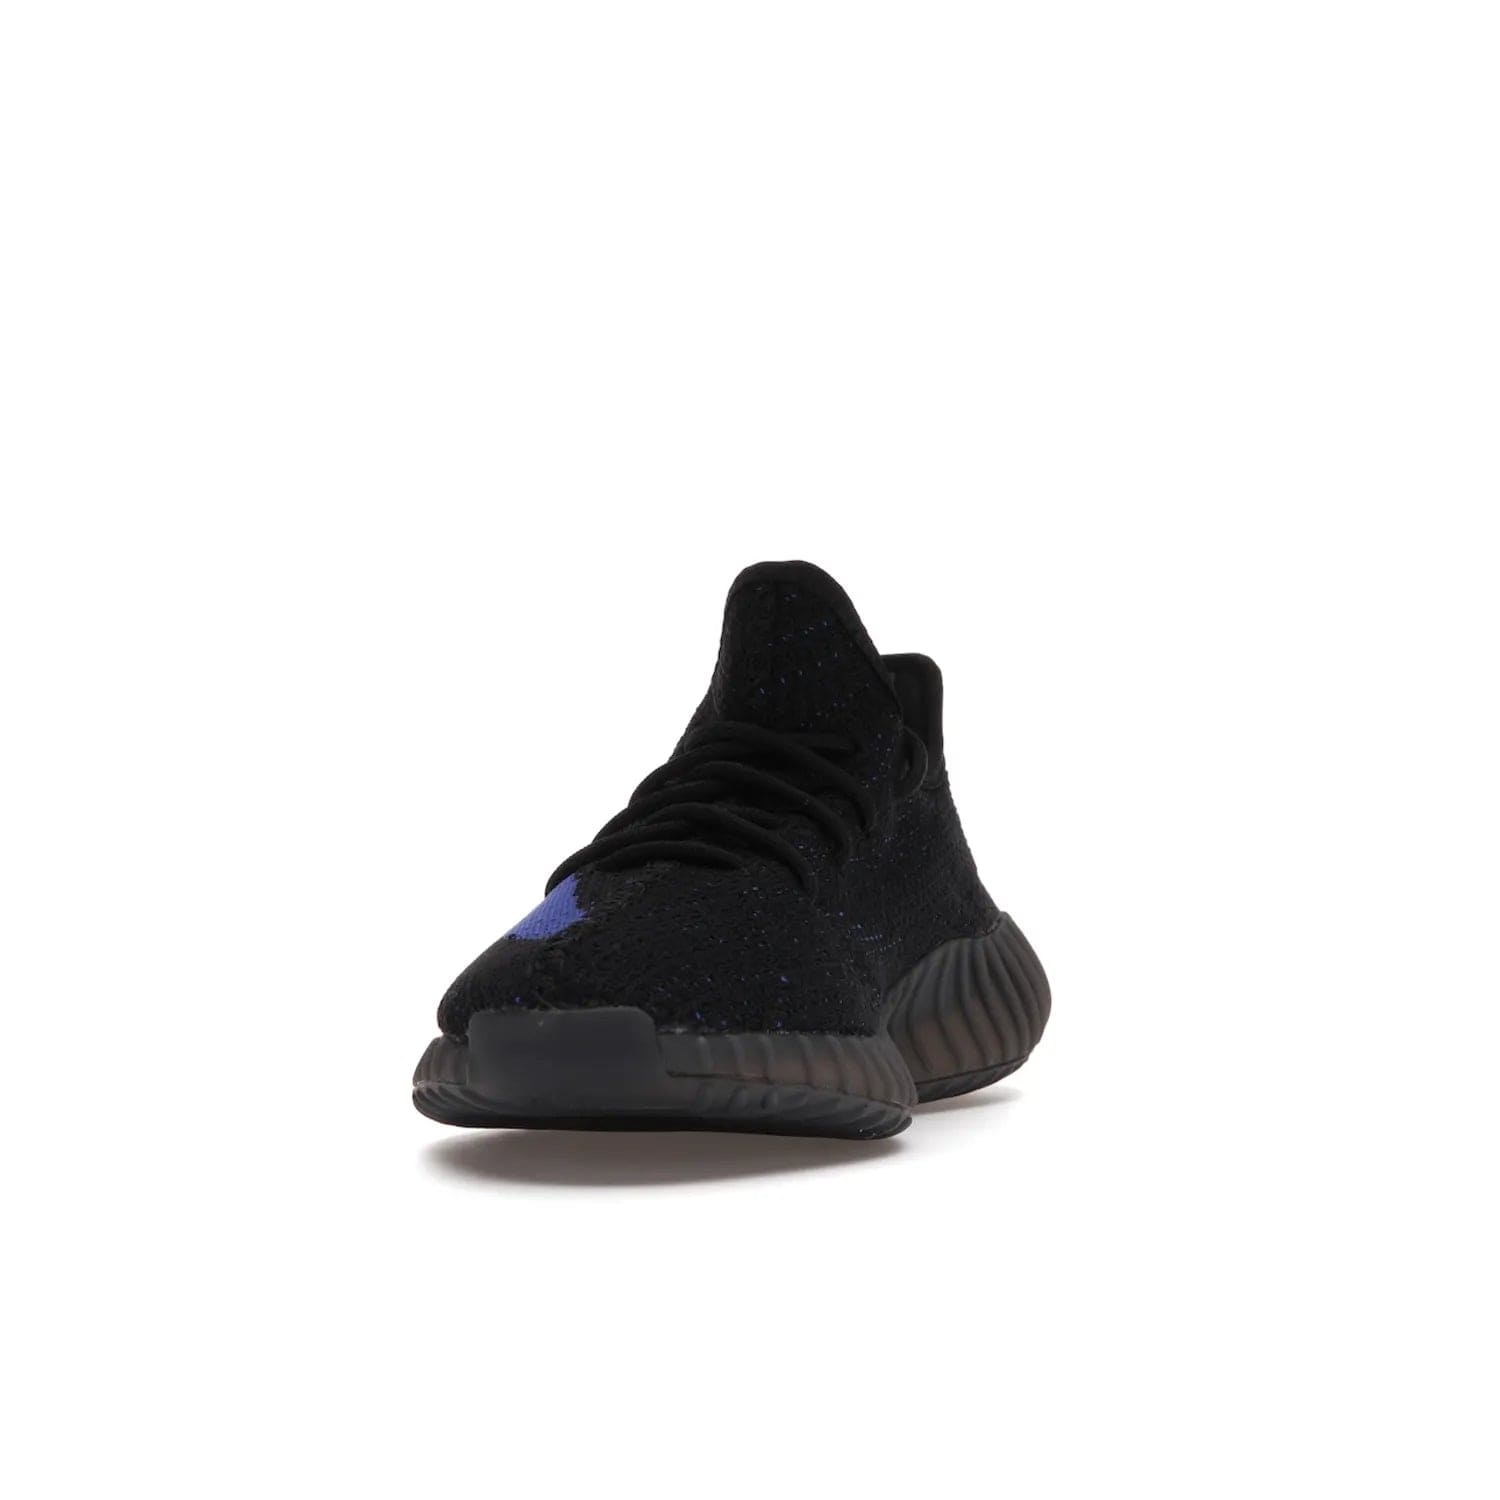 adidas Yeezy Boost 350 V2 Dazzling Blue - Image 12 - Only at www.BallersClubKickz.com - Shop the Adidas Yeezy 350 V2 Dazzling Blue, featuring a solid black Primeknit upper, Dazzling Blue side stripe, “SPLY-350” text, and a muted Boost sole. Releasing Feb 2022, this style is perfect for any shoe fan.